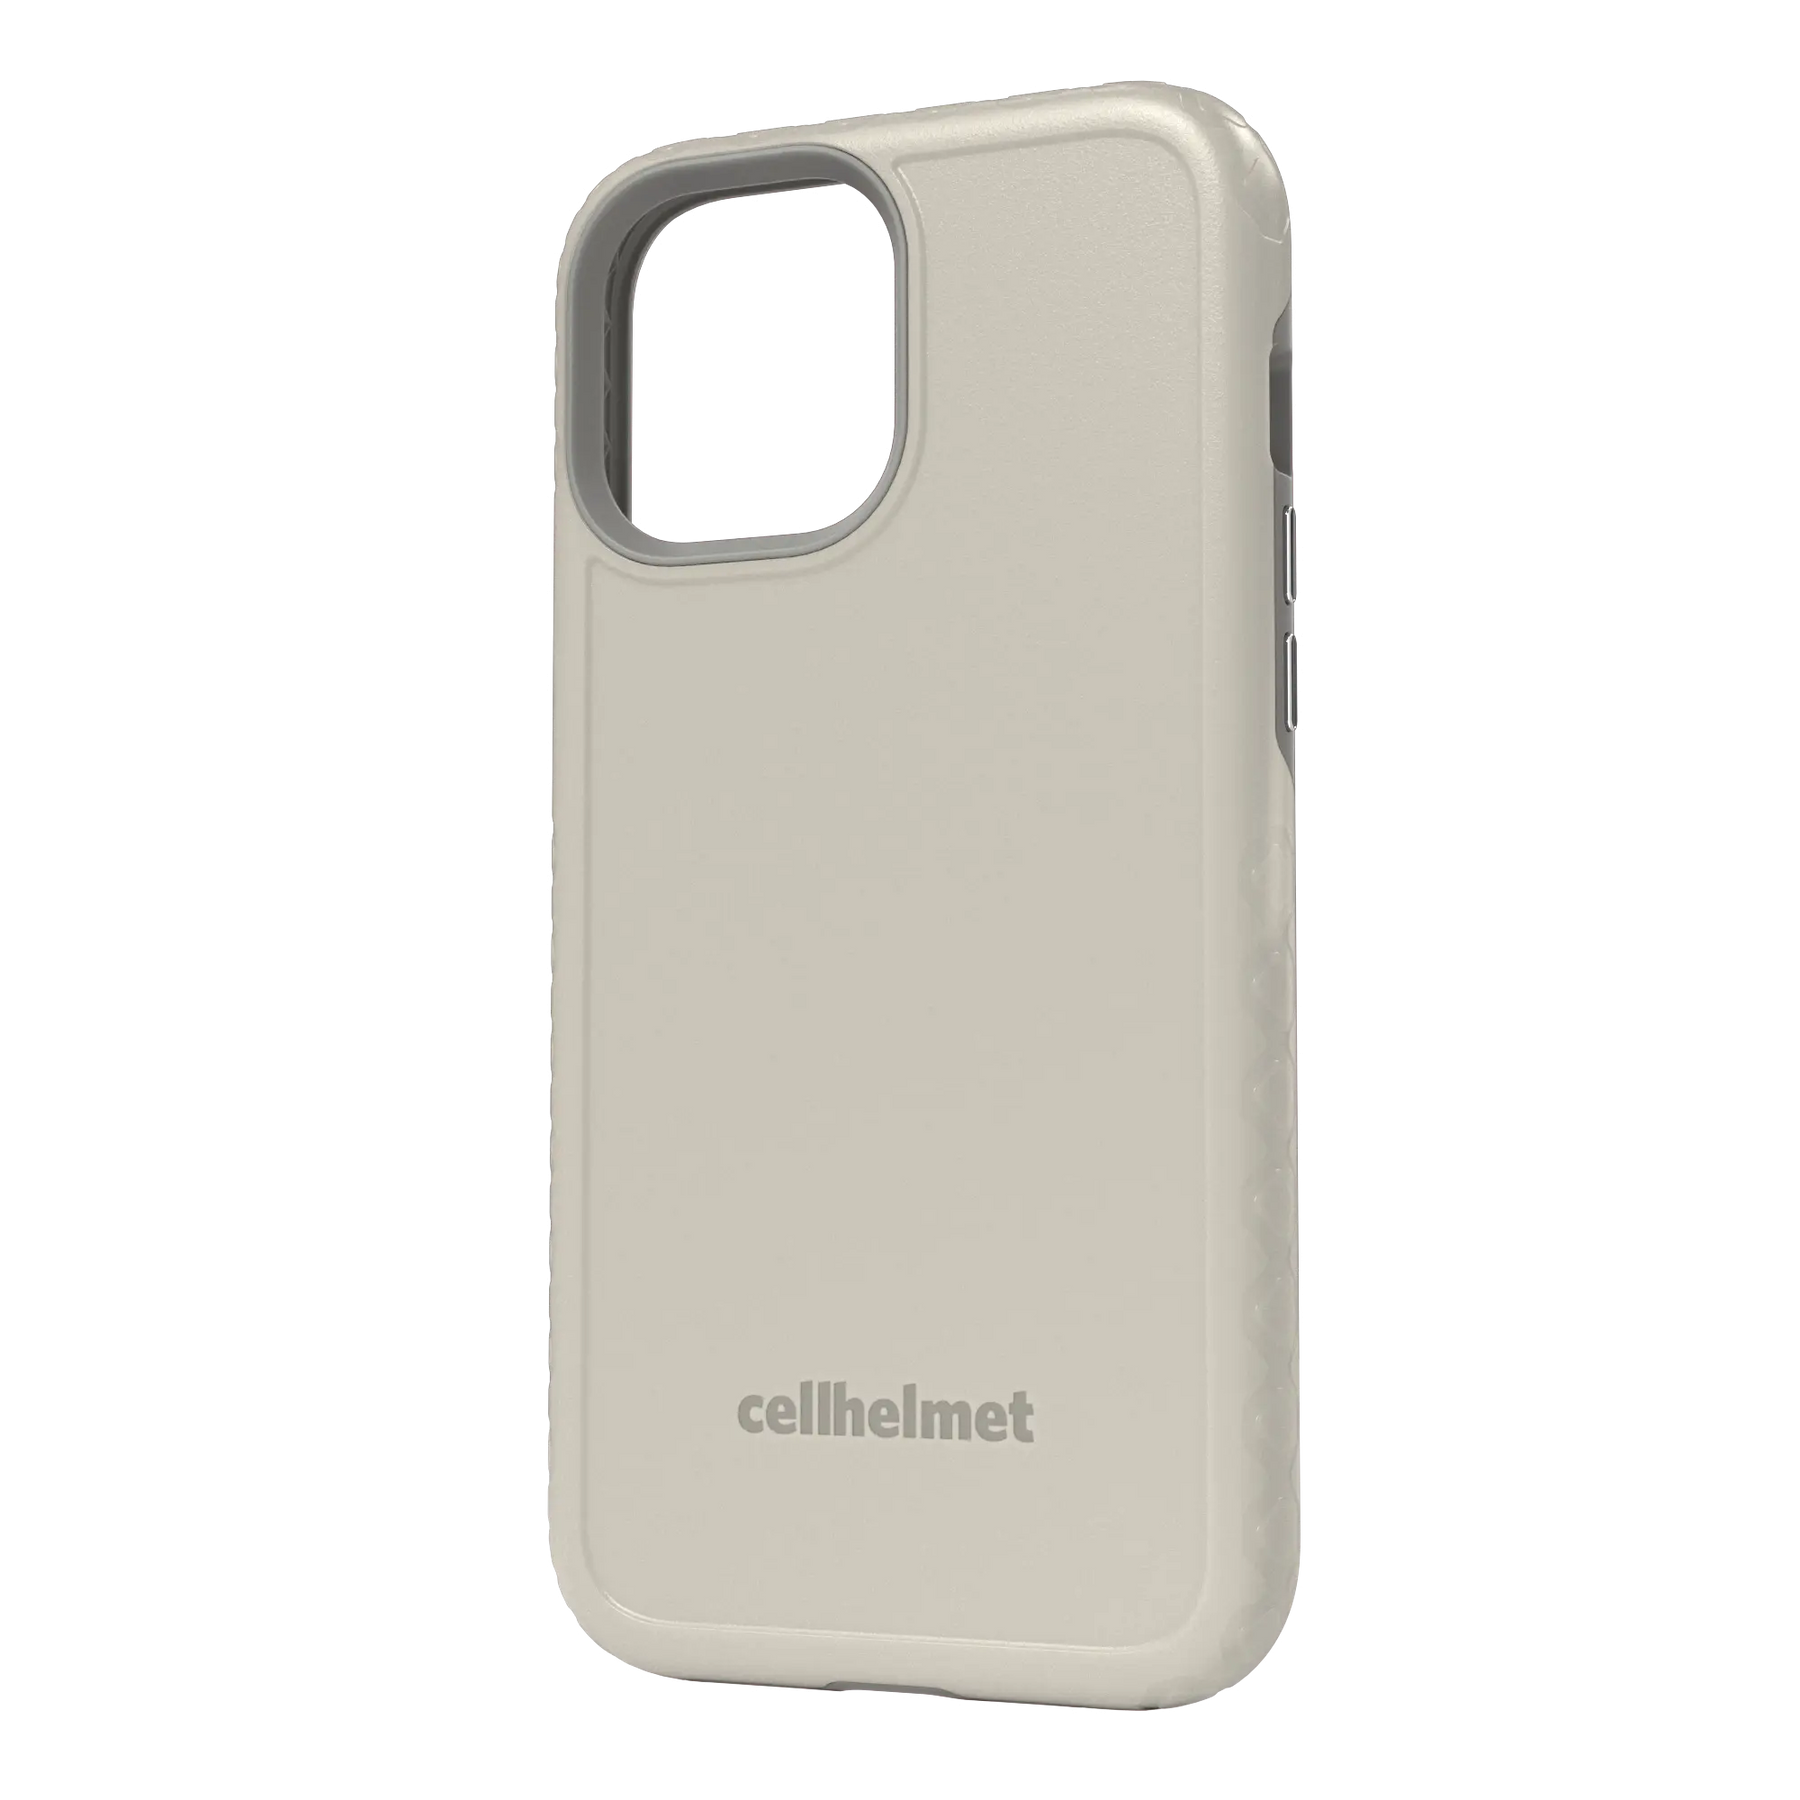 Gray cellhelmet Personalized Case for iPhone 12 Pro Max